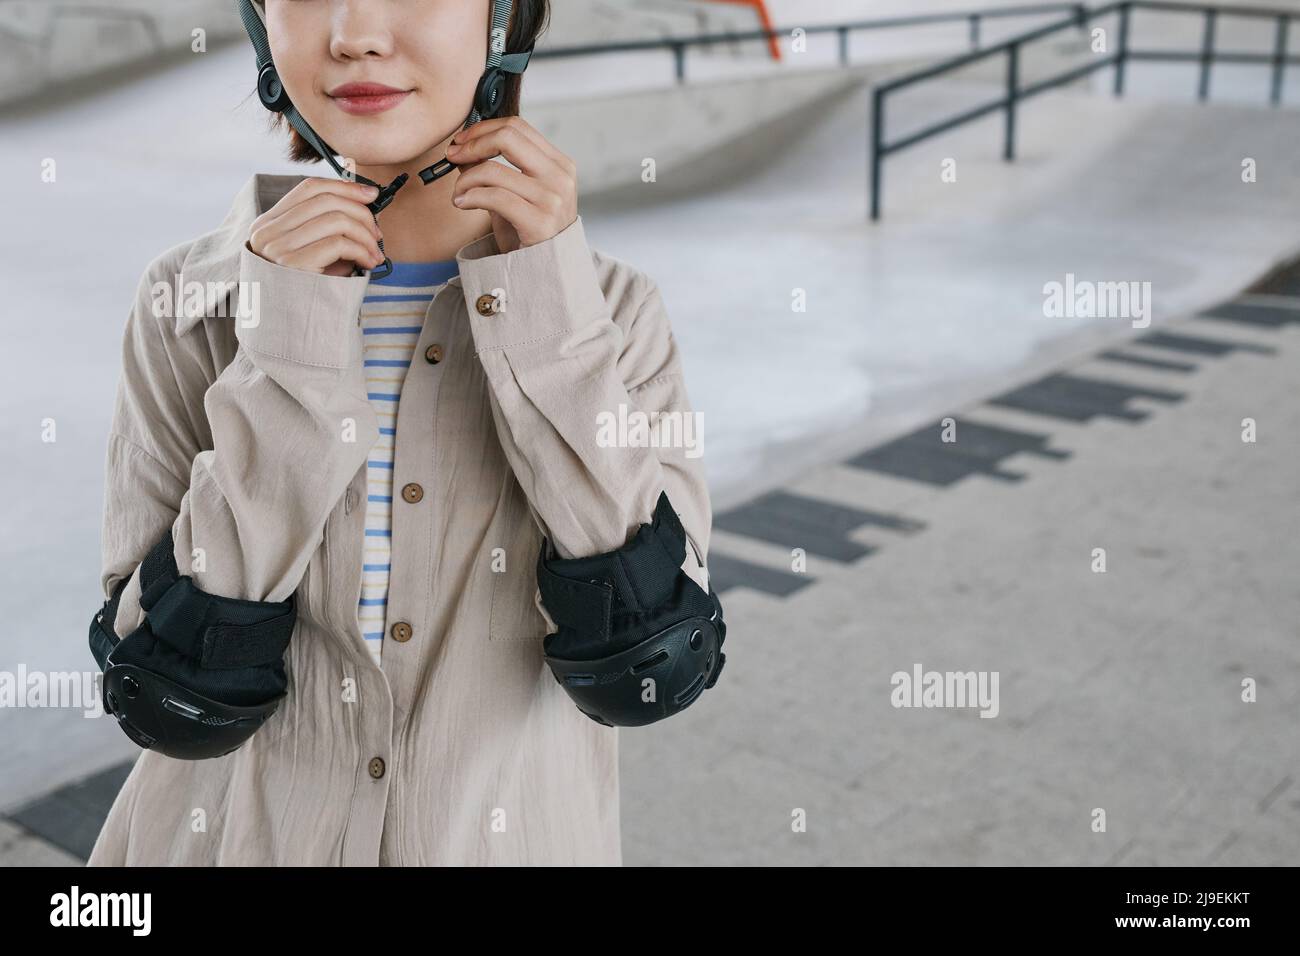 Midsection shot of young girl wearing protective guards and helmet in skatepark, copy space Stock Photo